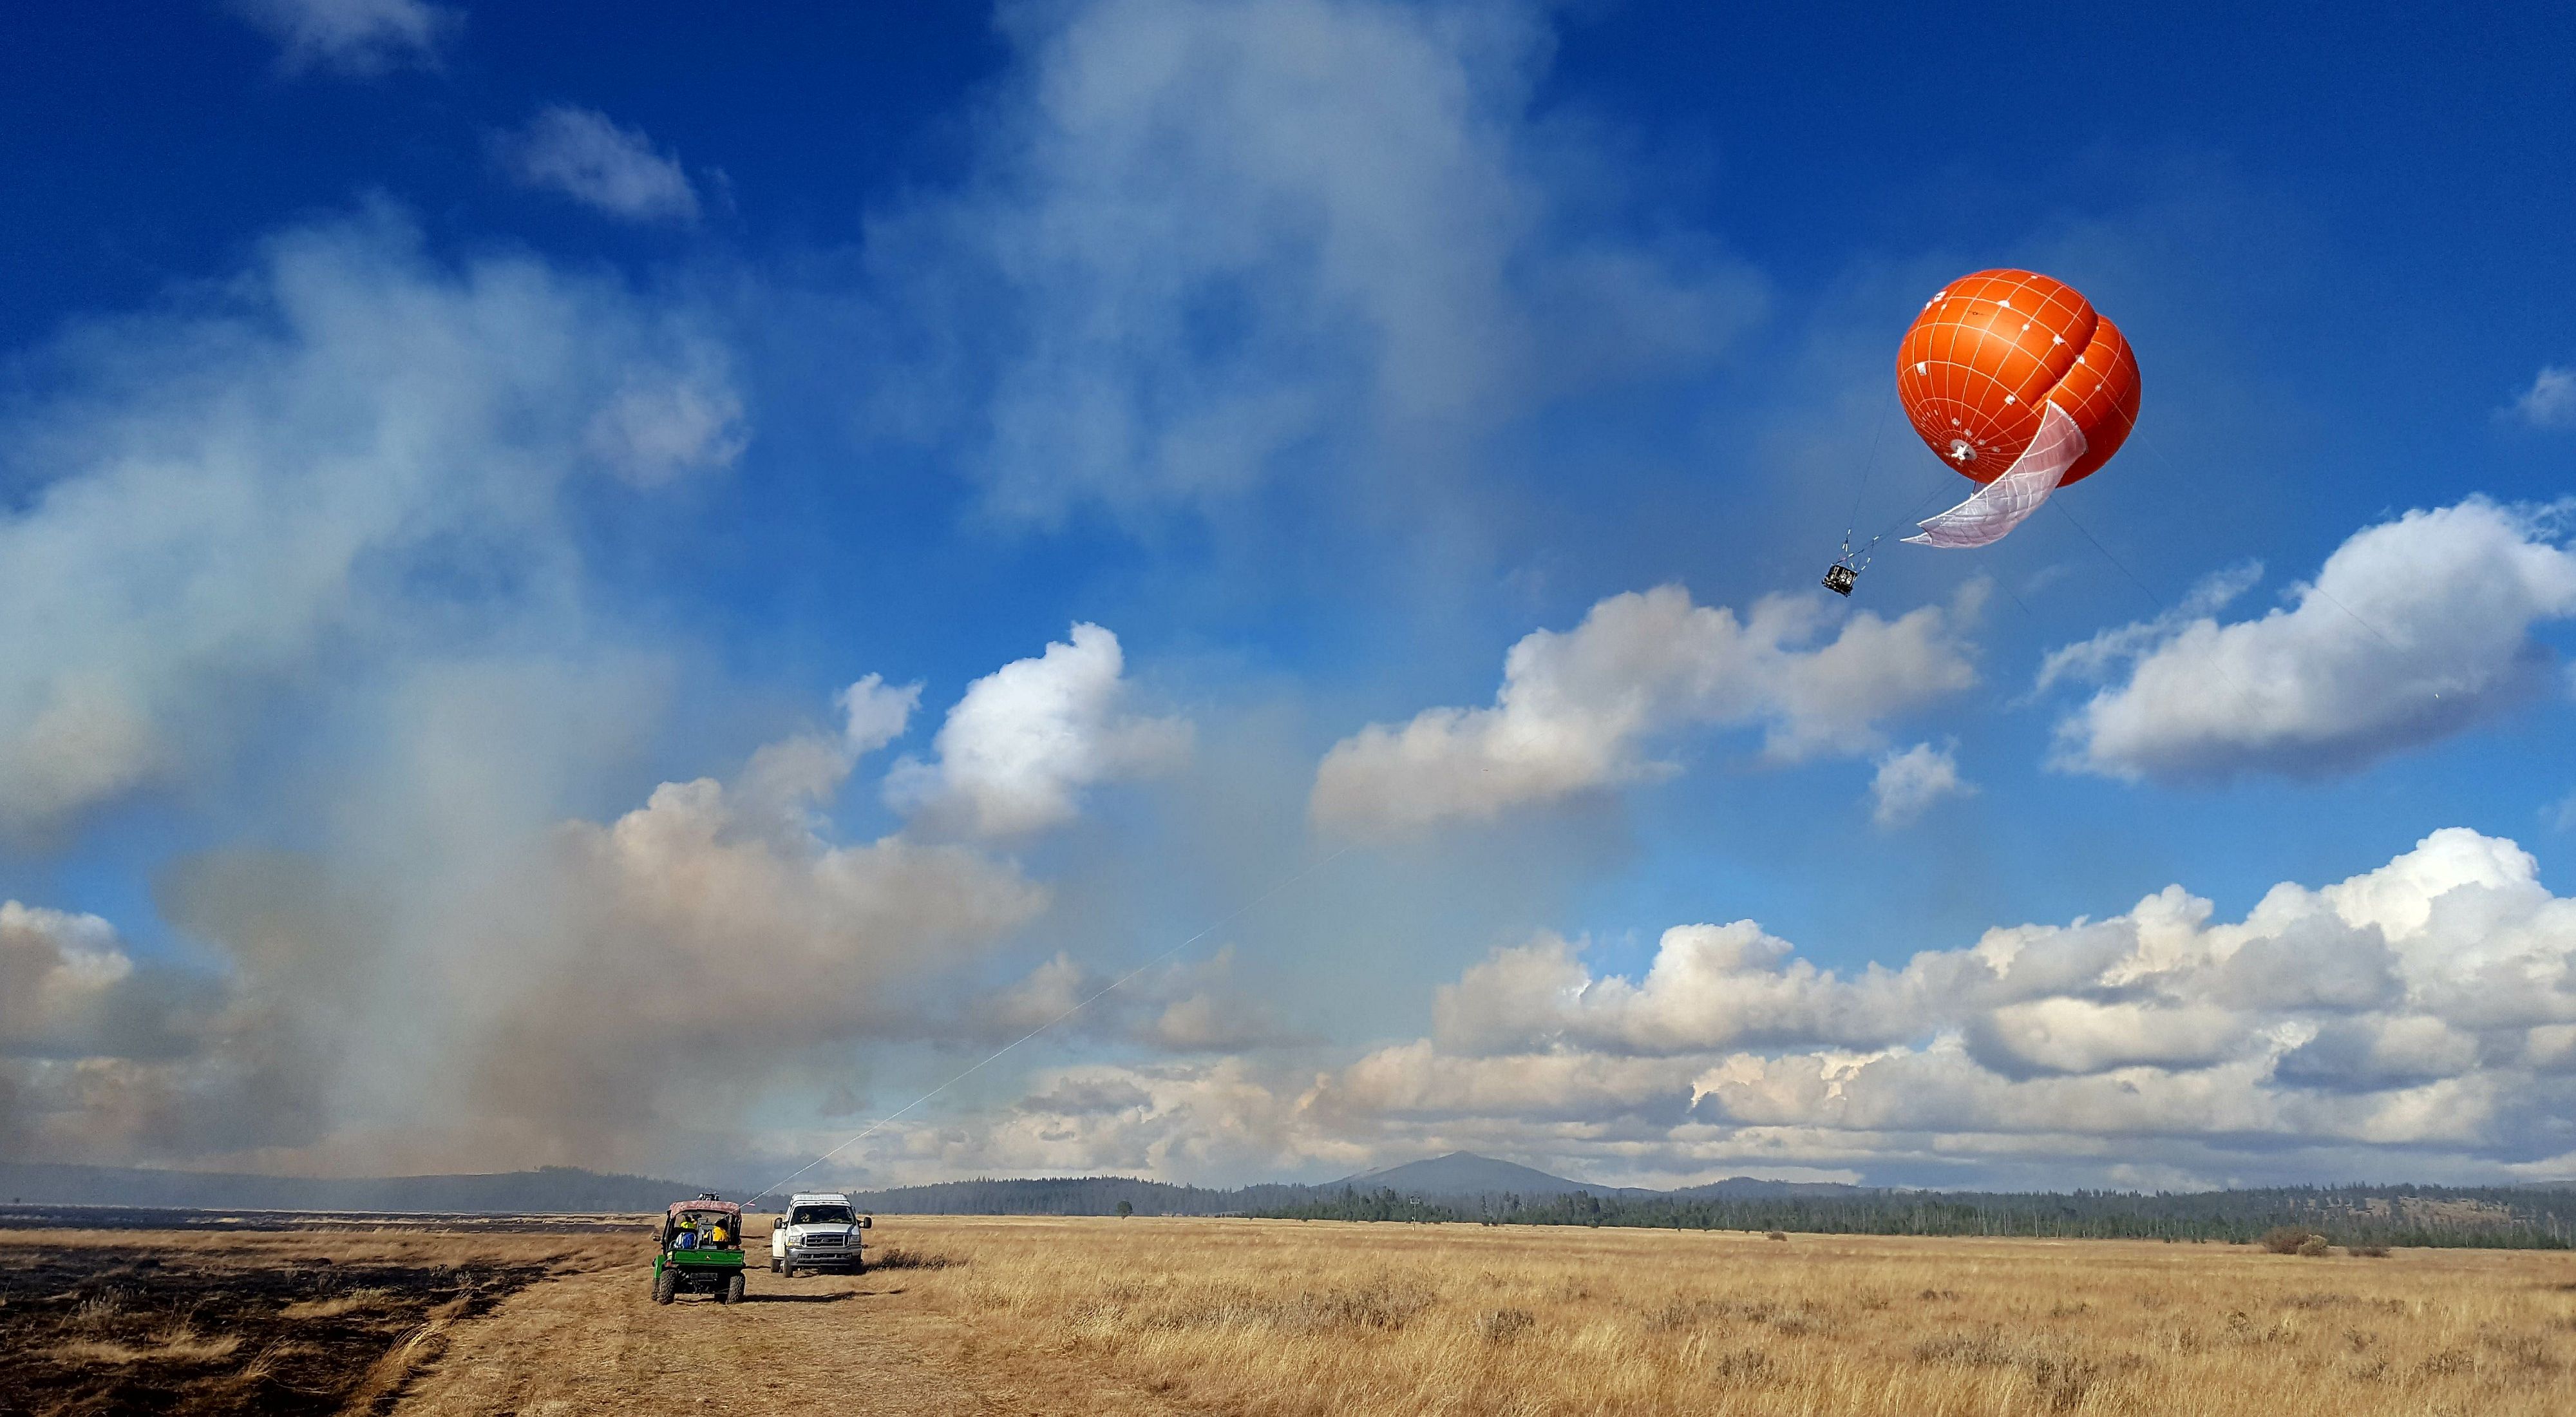 This Oregon preserve is a living laboratory for fire management research and studies.